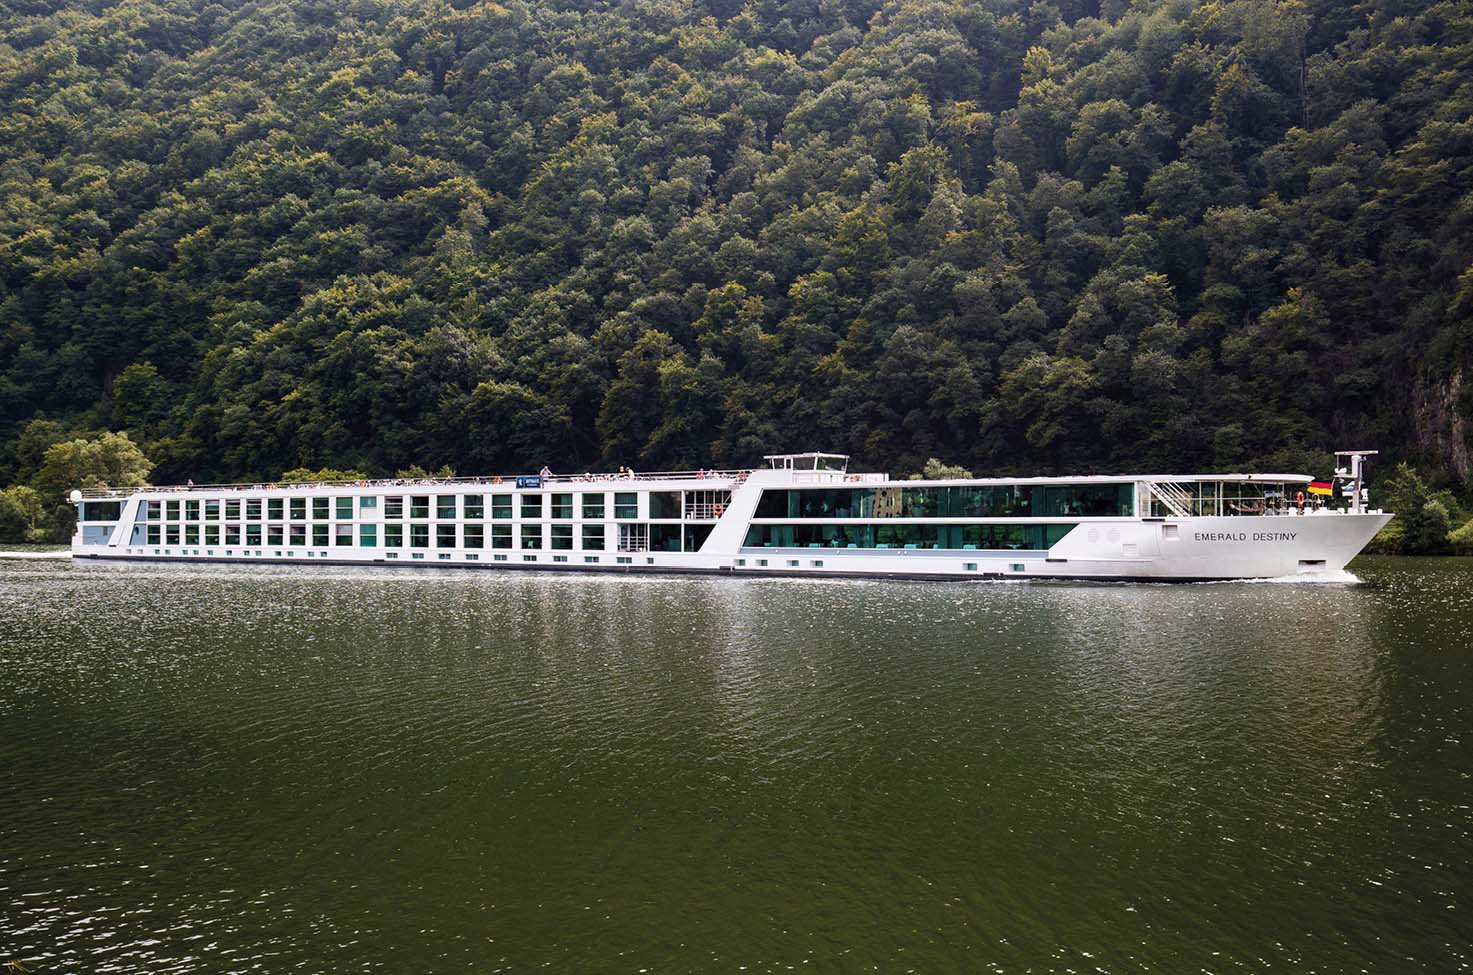 Luxury river cruise ship sailing on calm waters past forestry in Central Europe